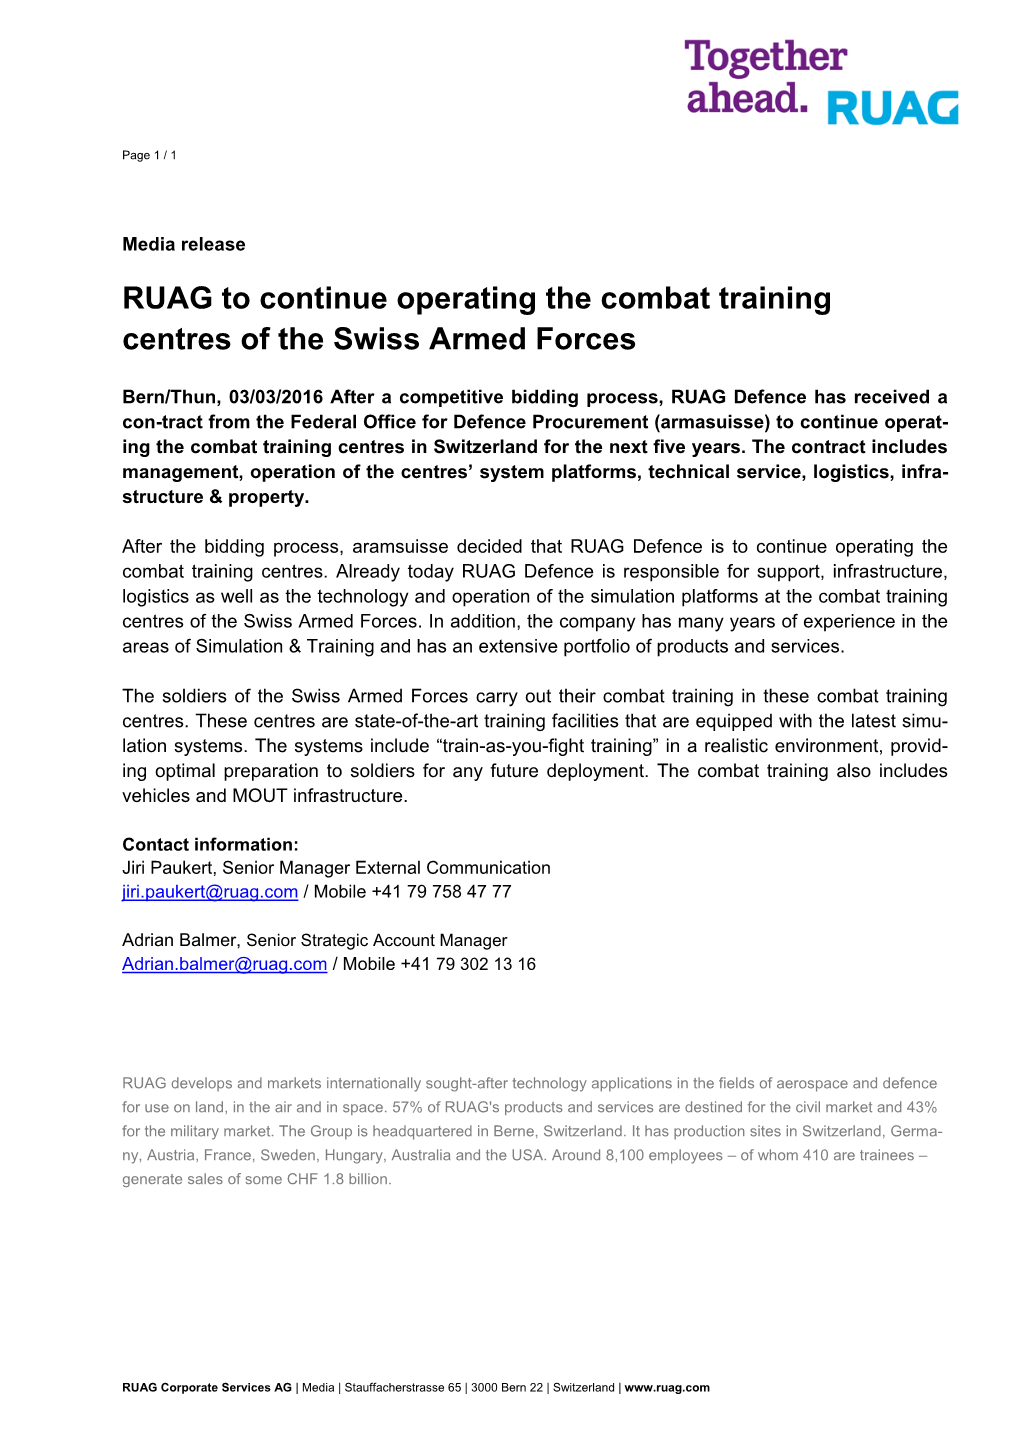 RUAG to Continue Operating the Combat Training Centres of the Swiss Armed Forces